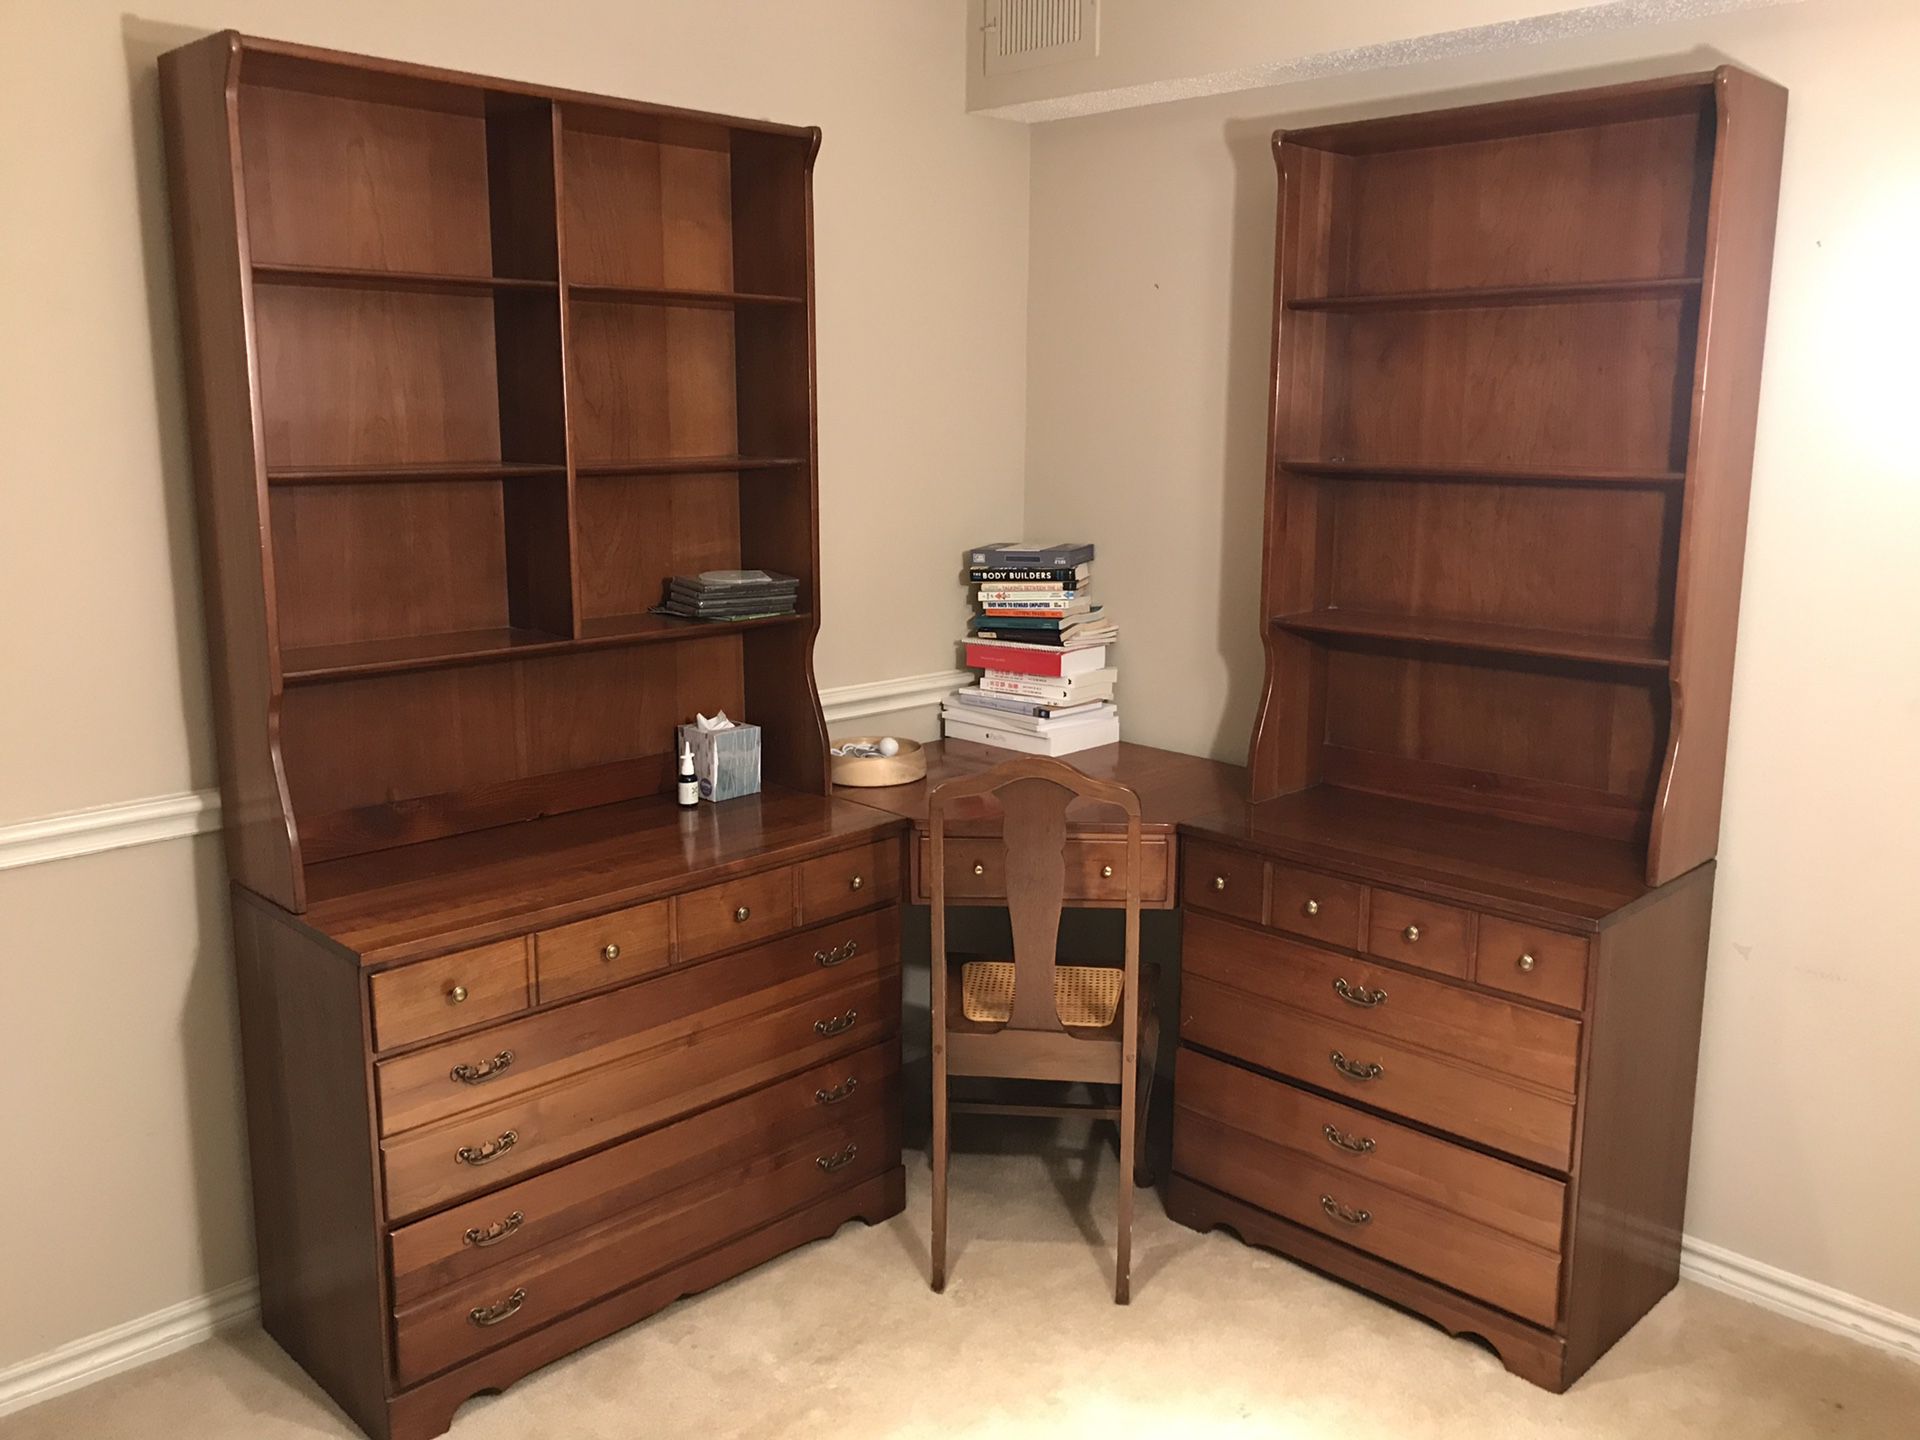 Bedroom Set: 3 dressers 2 bookshelves and desk with chair